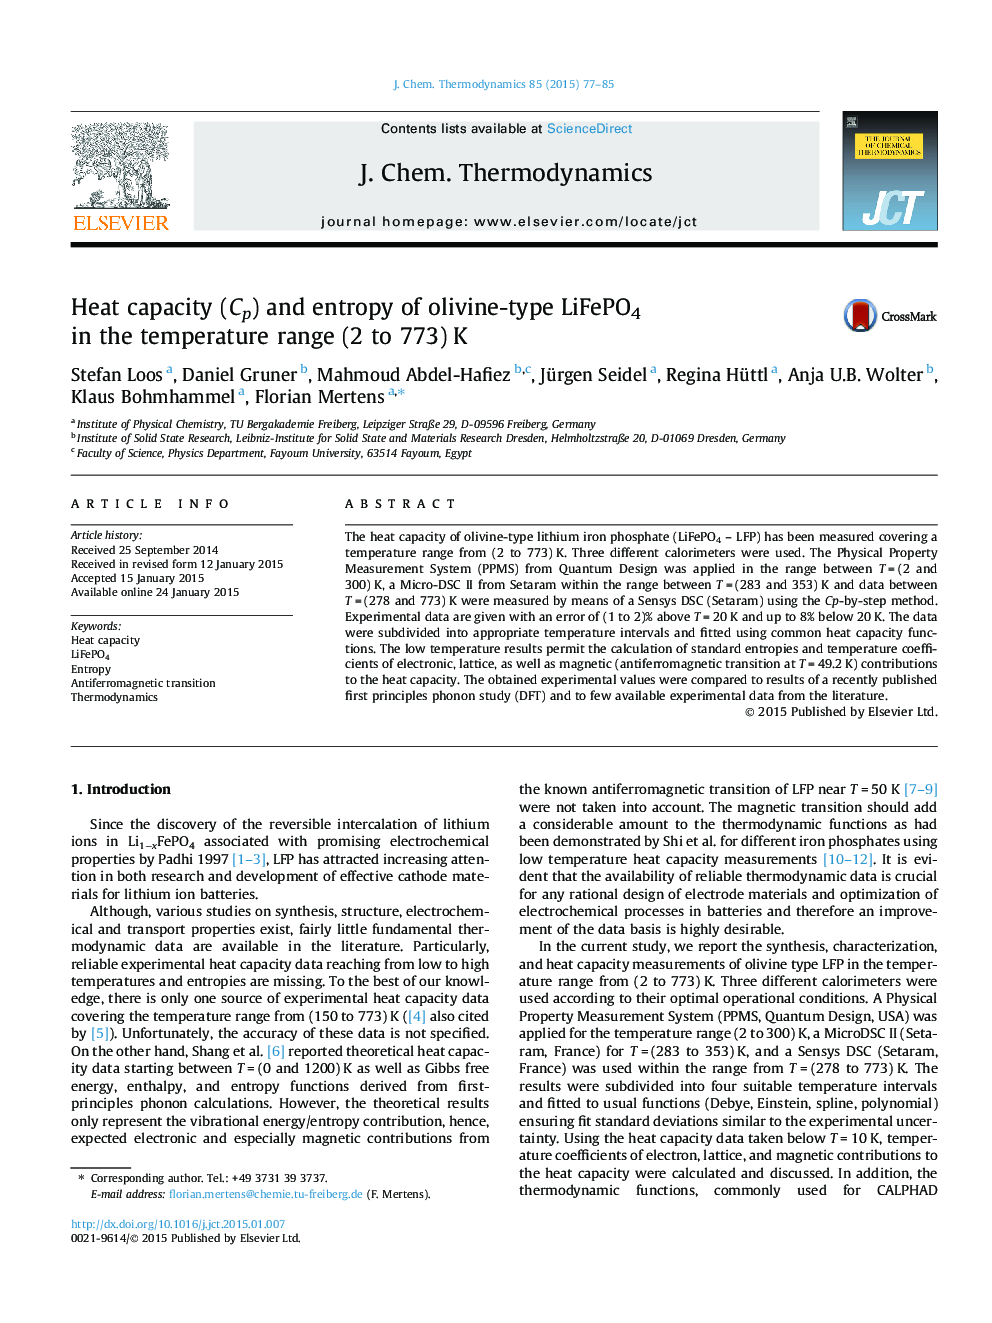 Heat capacity (Cp) and entropy of olivine-type LiFePO4 in the temperature range (2 to 773)Â K